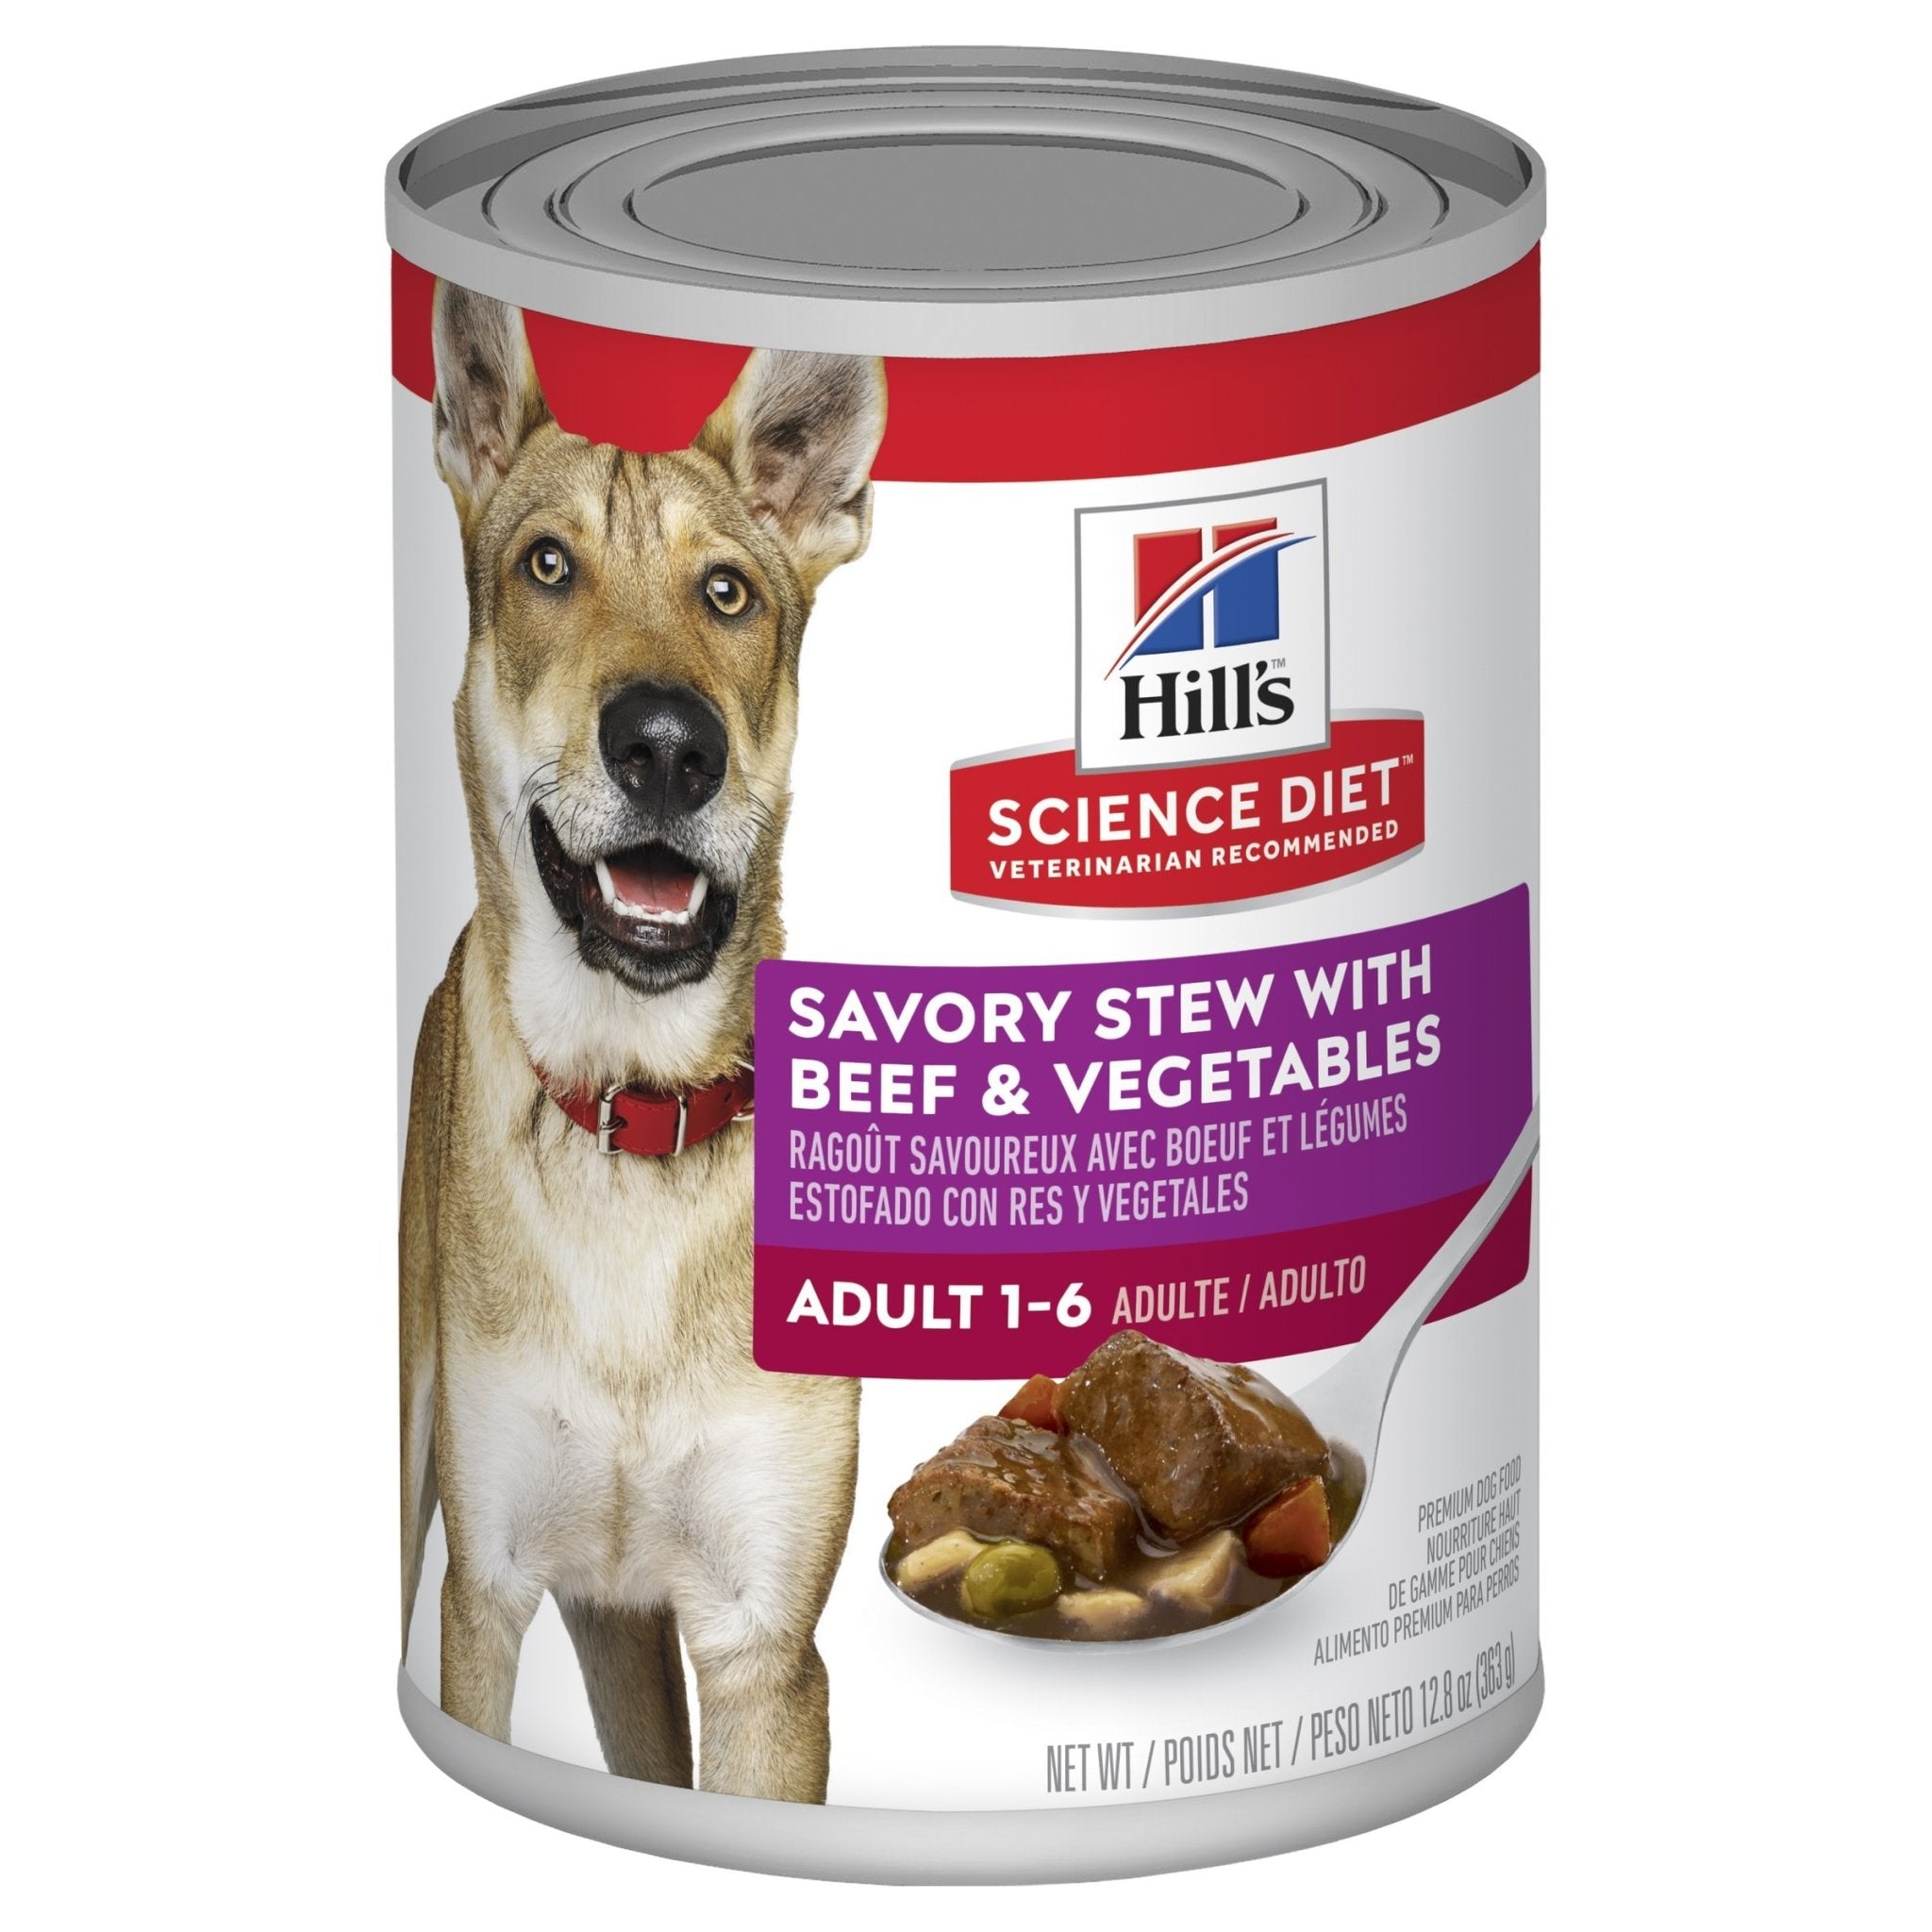 Hills Science Diet Adult Savory Stew Beef & Vegetables Canned Dog Food, 363g, 12 Pack